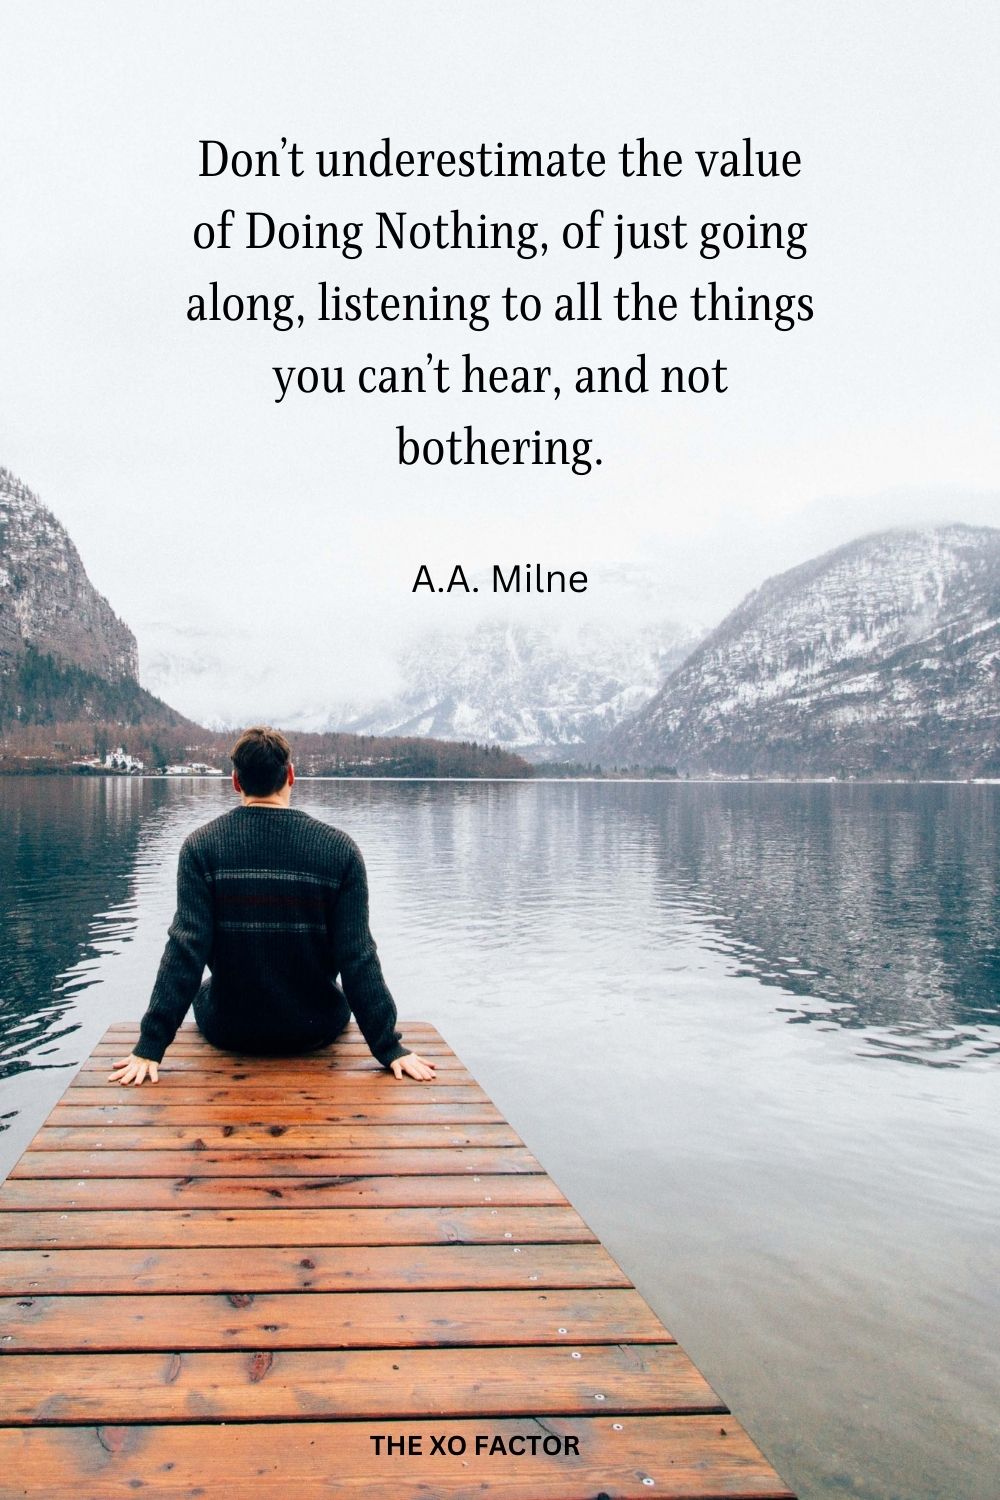 Don’t underestimate the value of Doing Nothing, of just going along, listening to all the things you can’t hear, and not bothering.
A.A. Milne